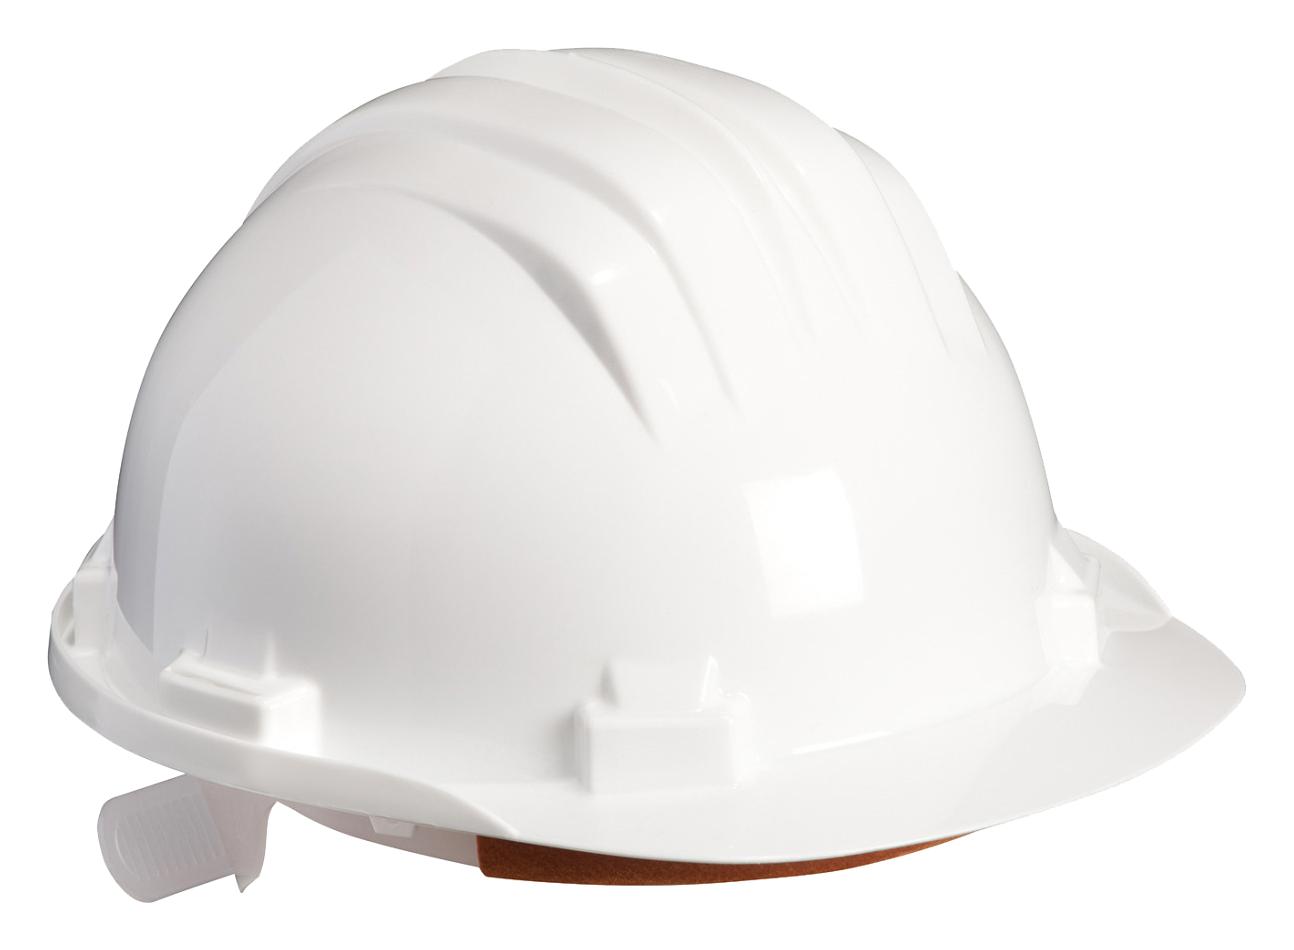 Uci Hd/cli/5-Rs/wh Standard Safety Helmet, White